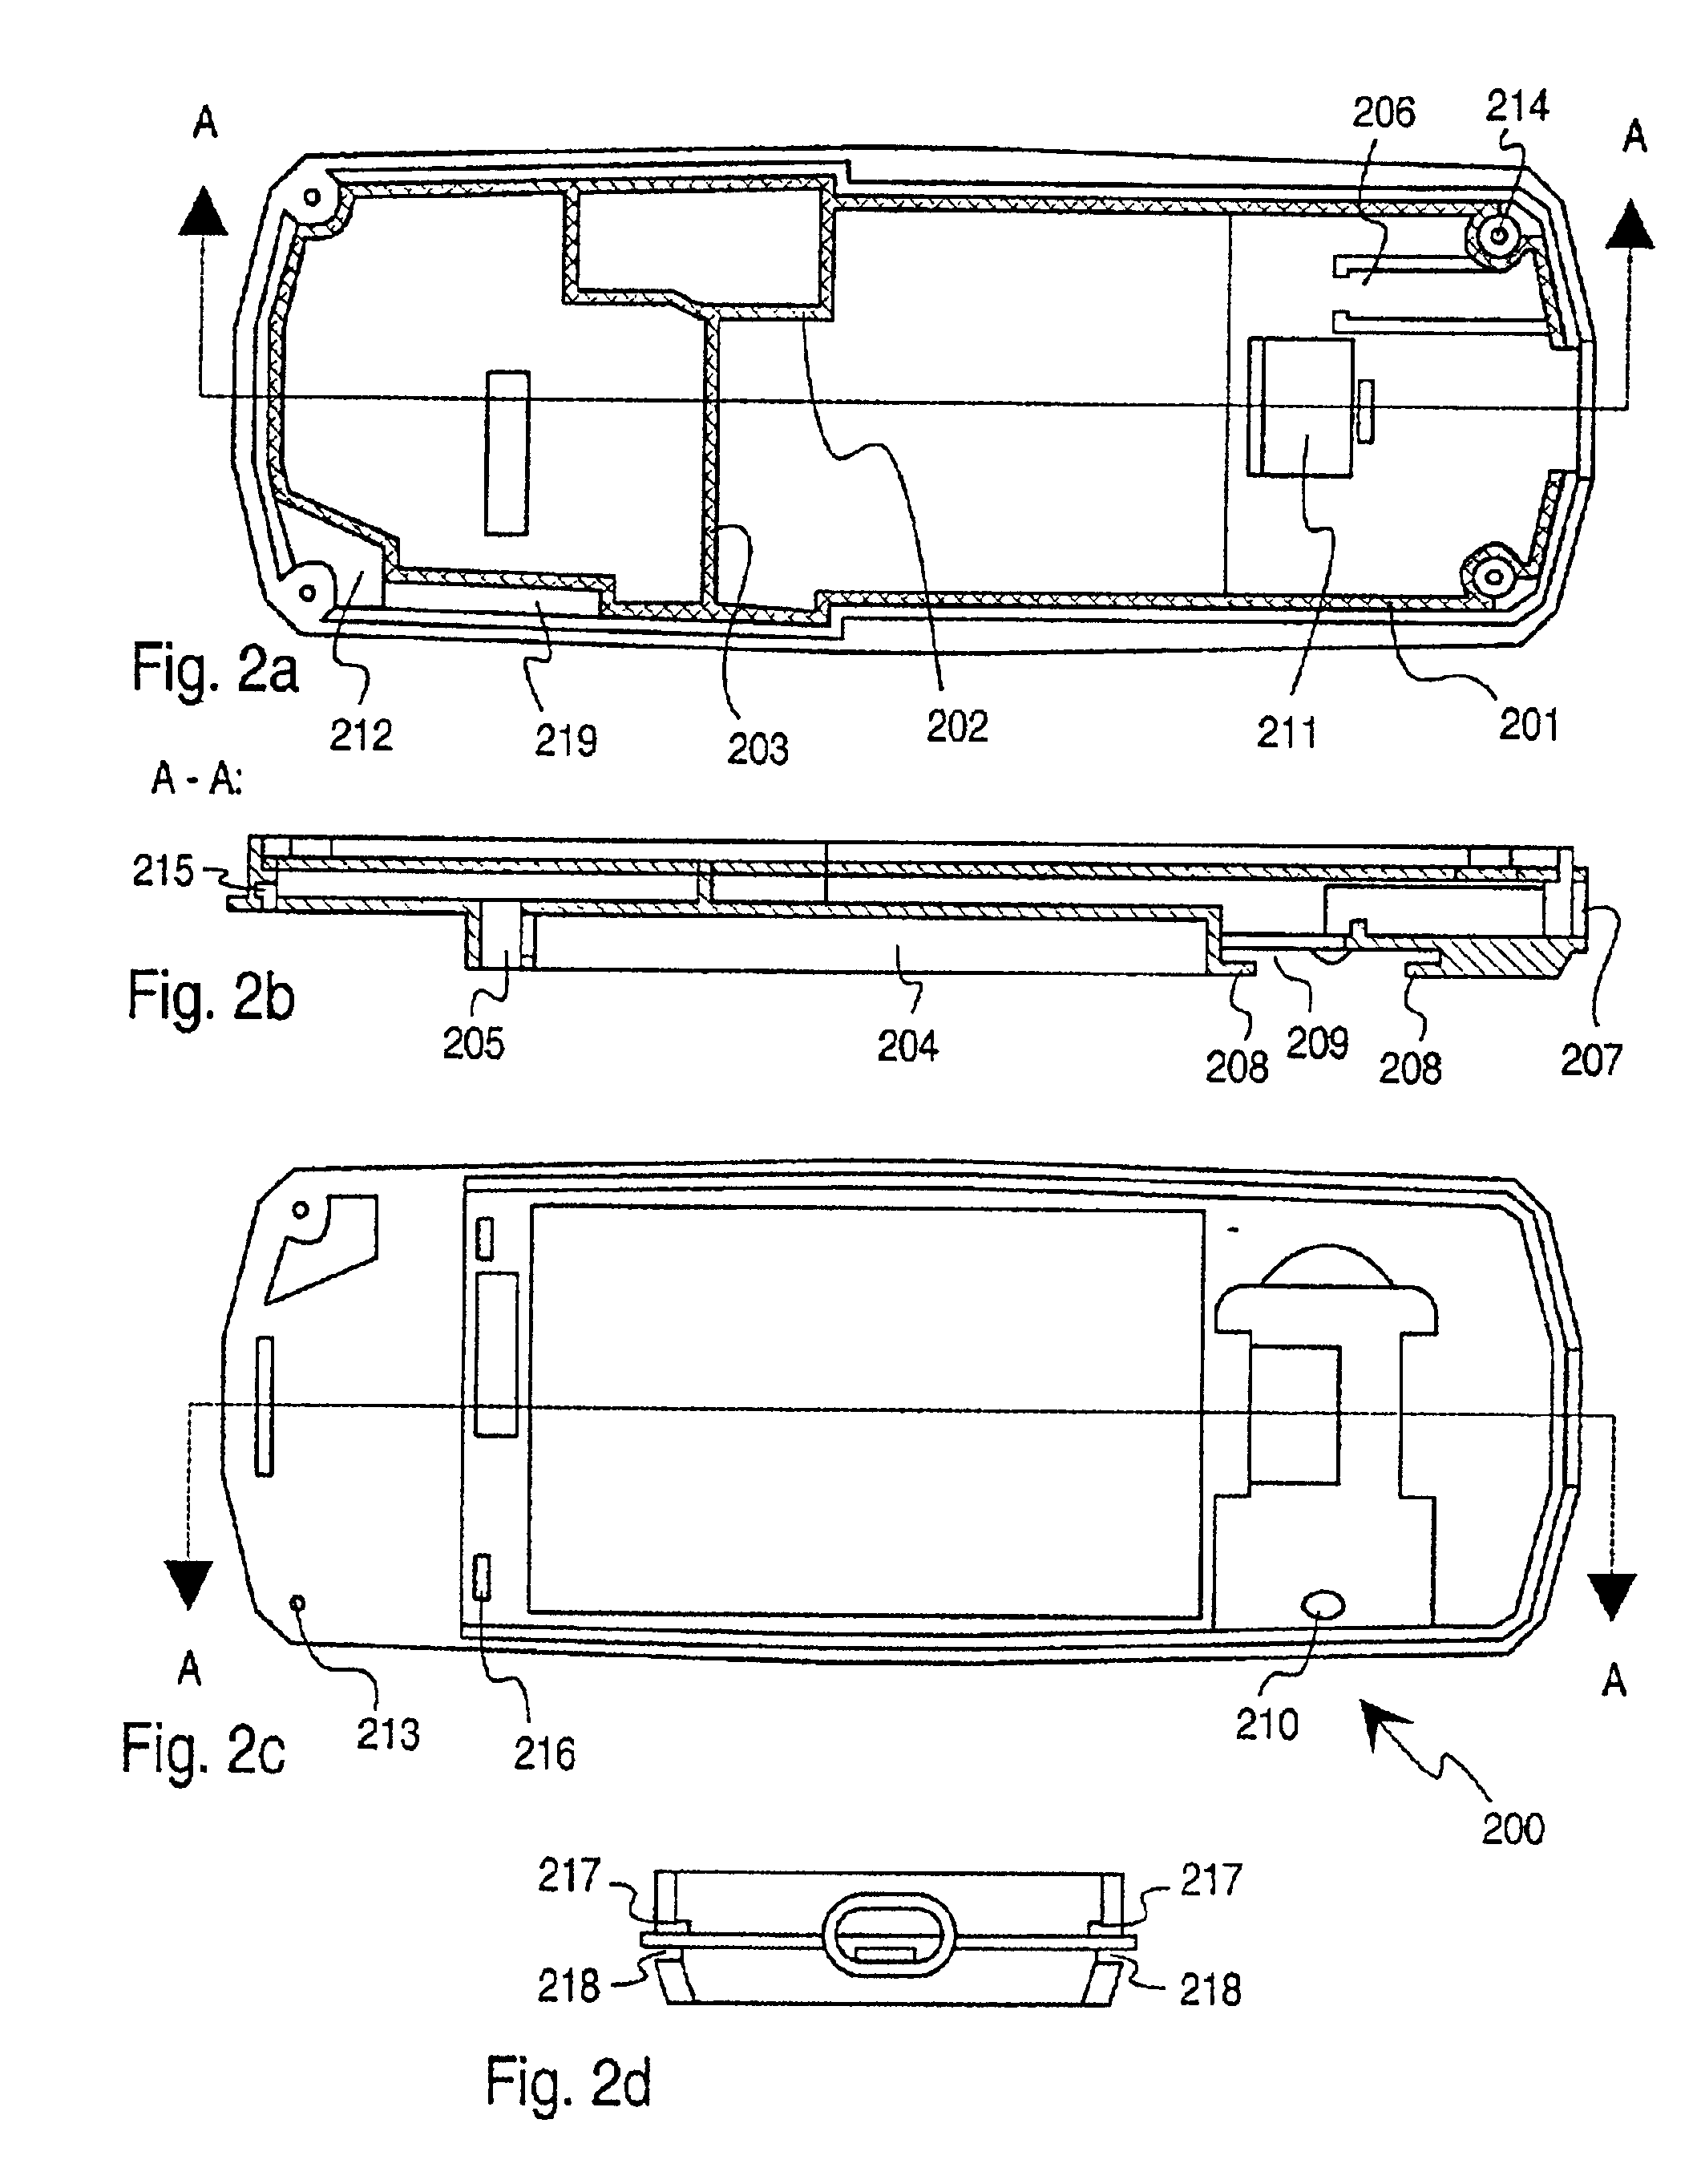 Mechanical construction and an assembly method for a mobile telecommunication device